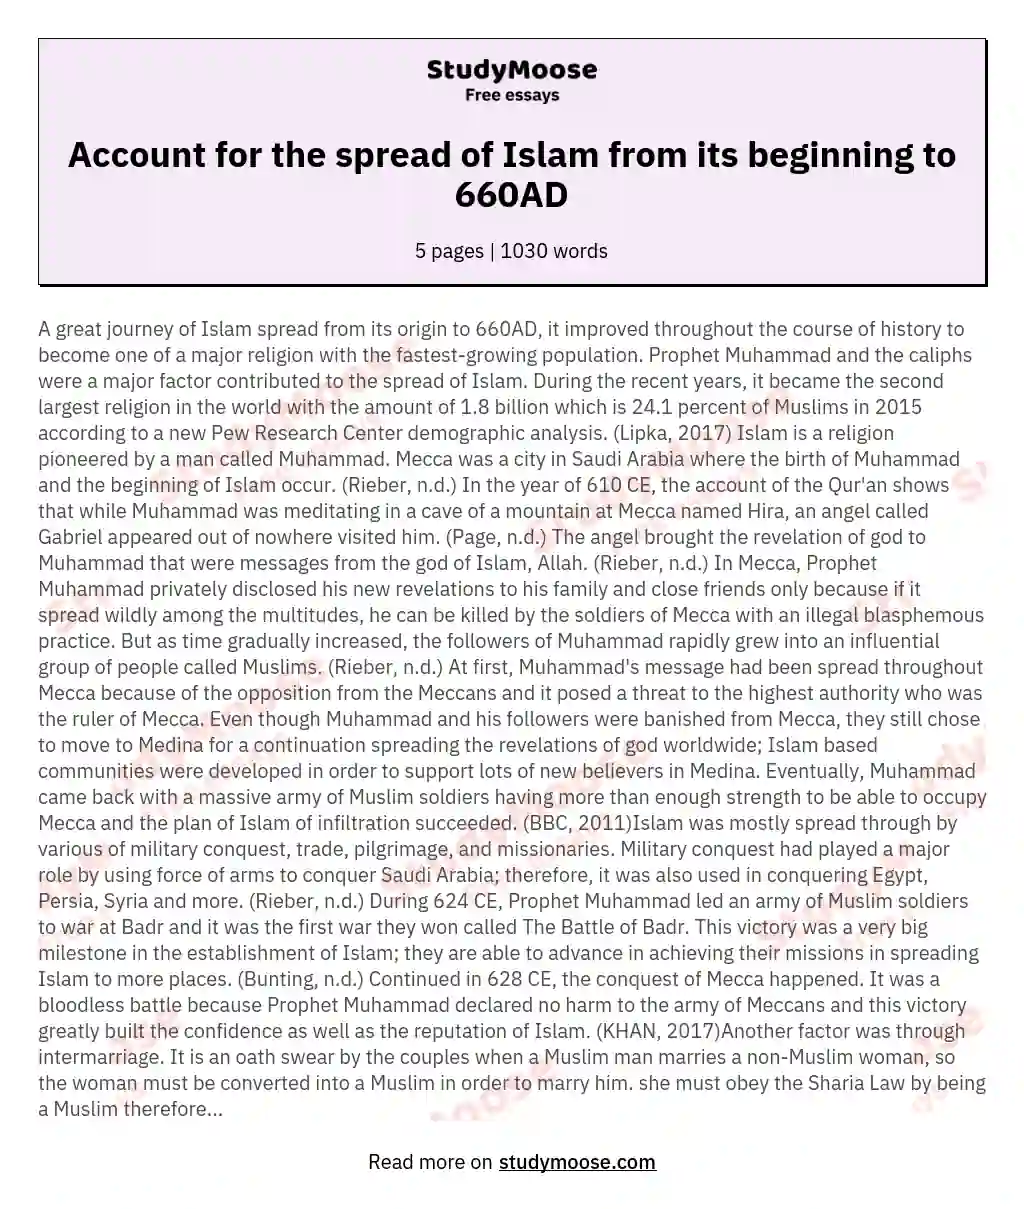 Account for the spread of Islam from its beginning to 660AD